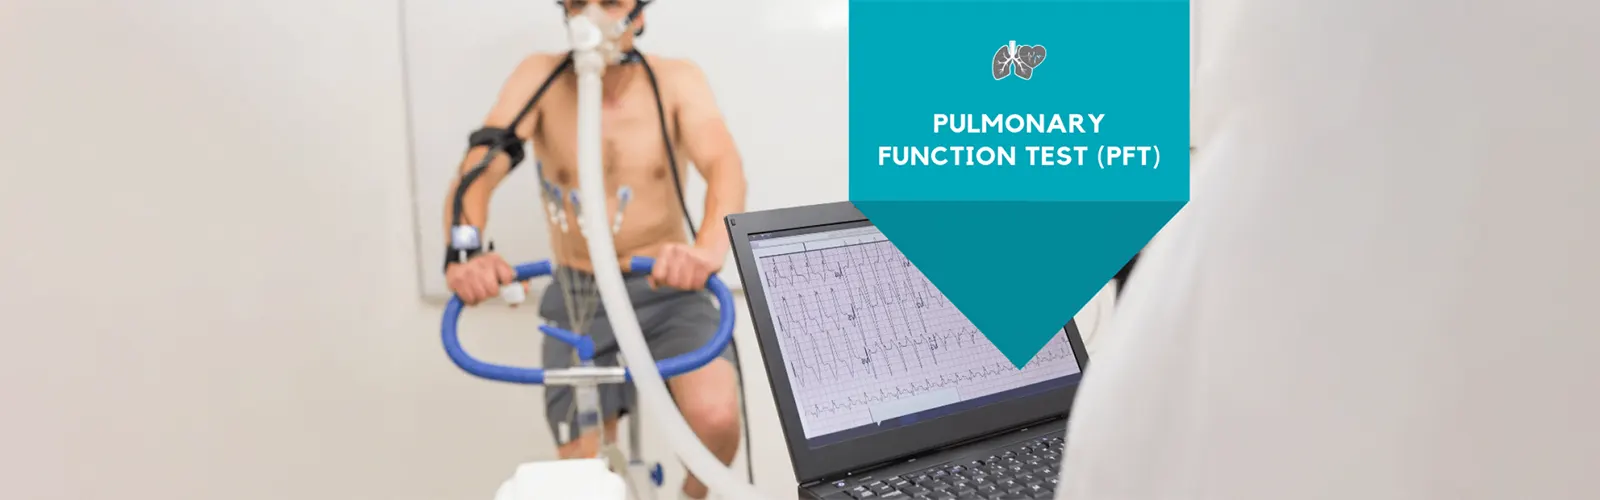 What Are The Side Effects Of (PFT) Pulmonary Function Test?